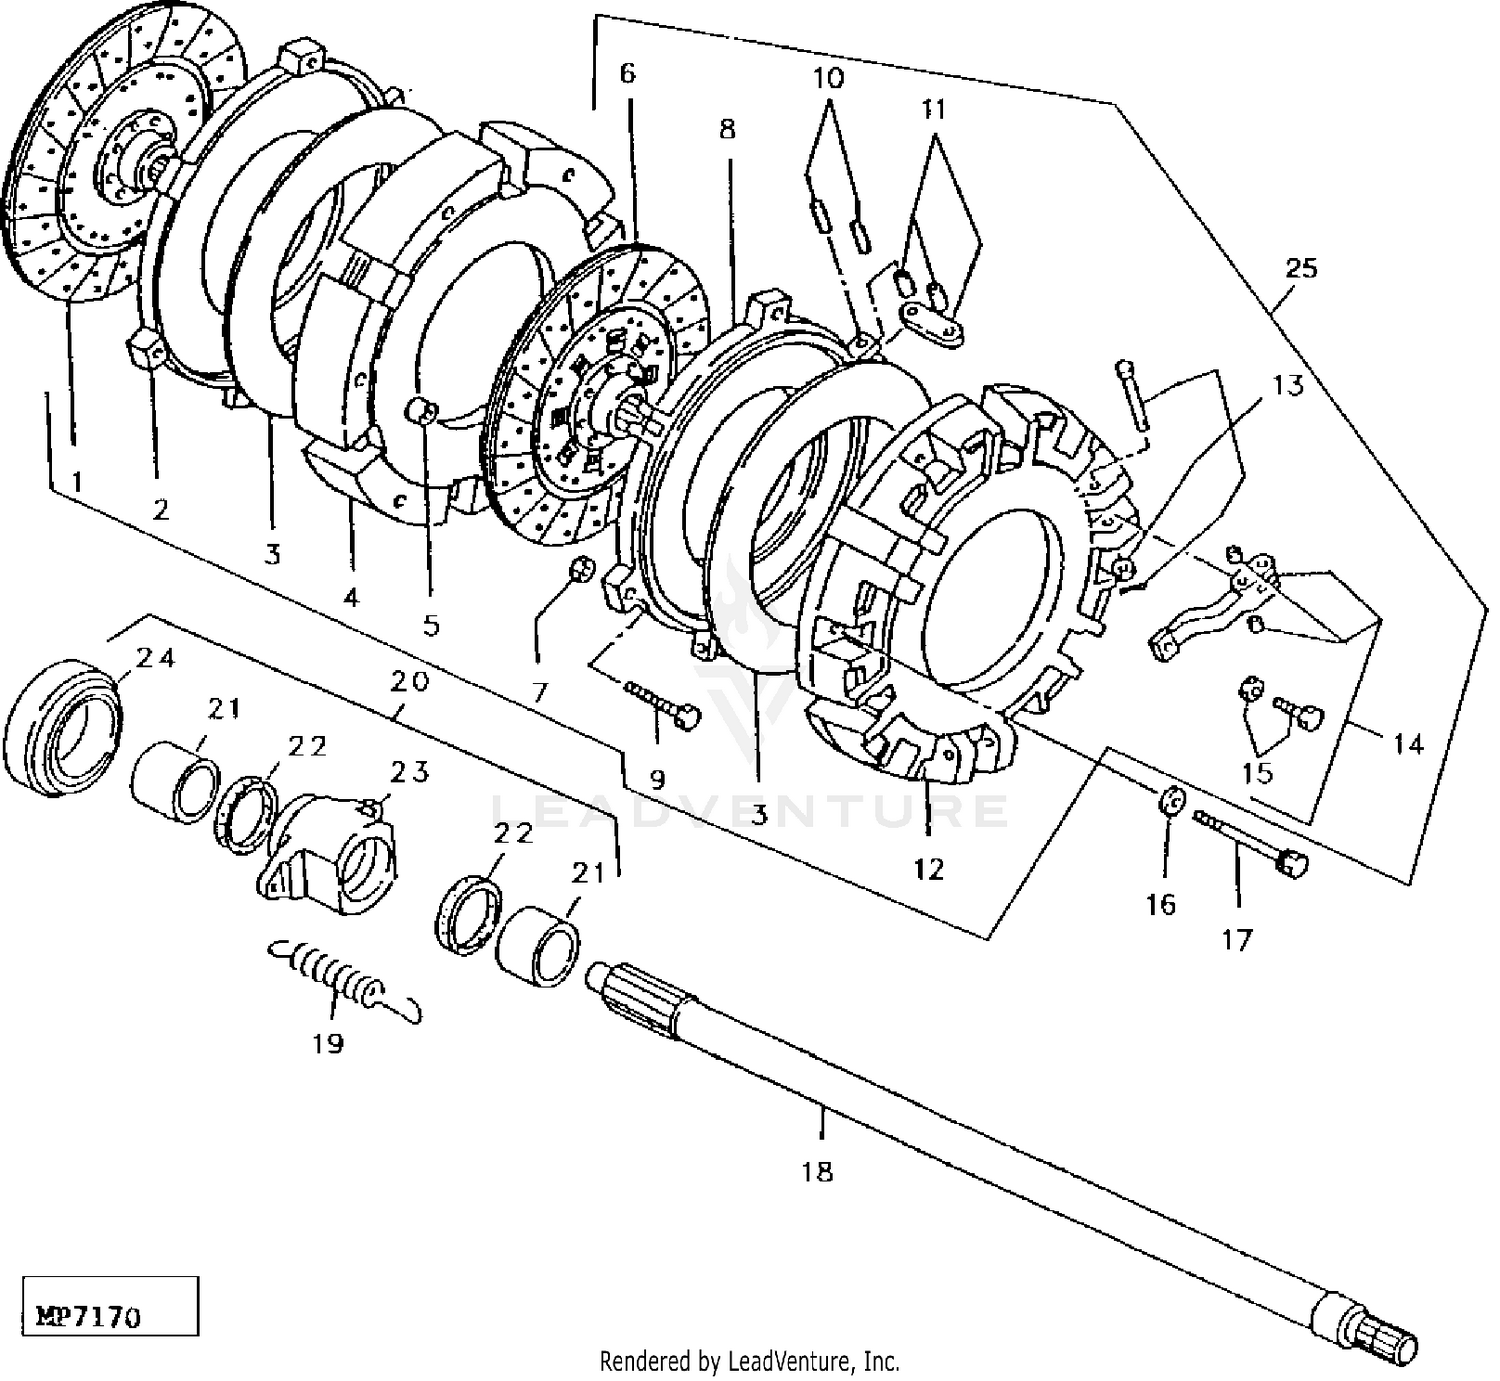 John Deere 1070 Tractor Manual Transmission Clutch Assembly